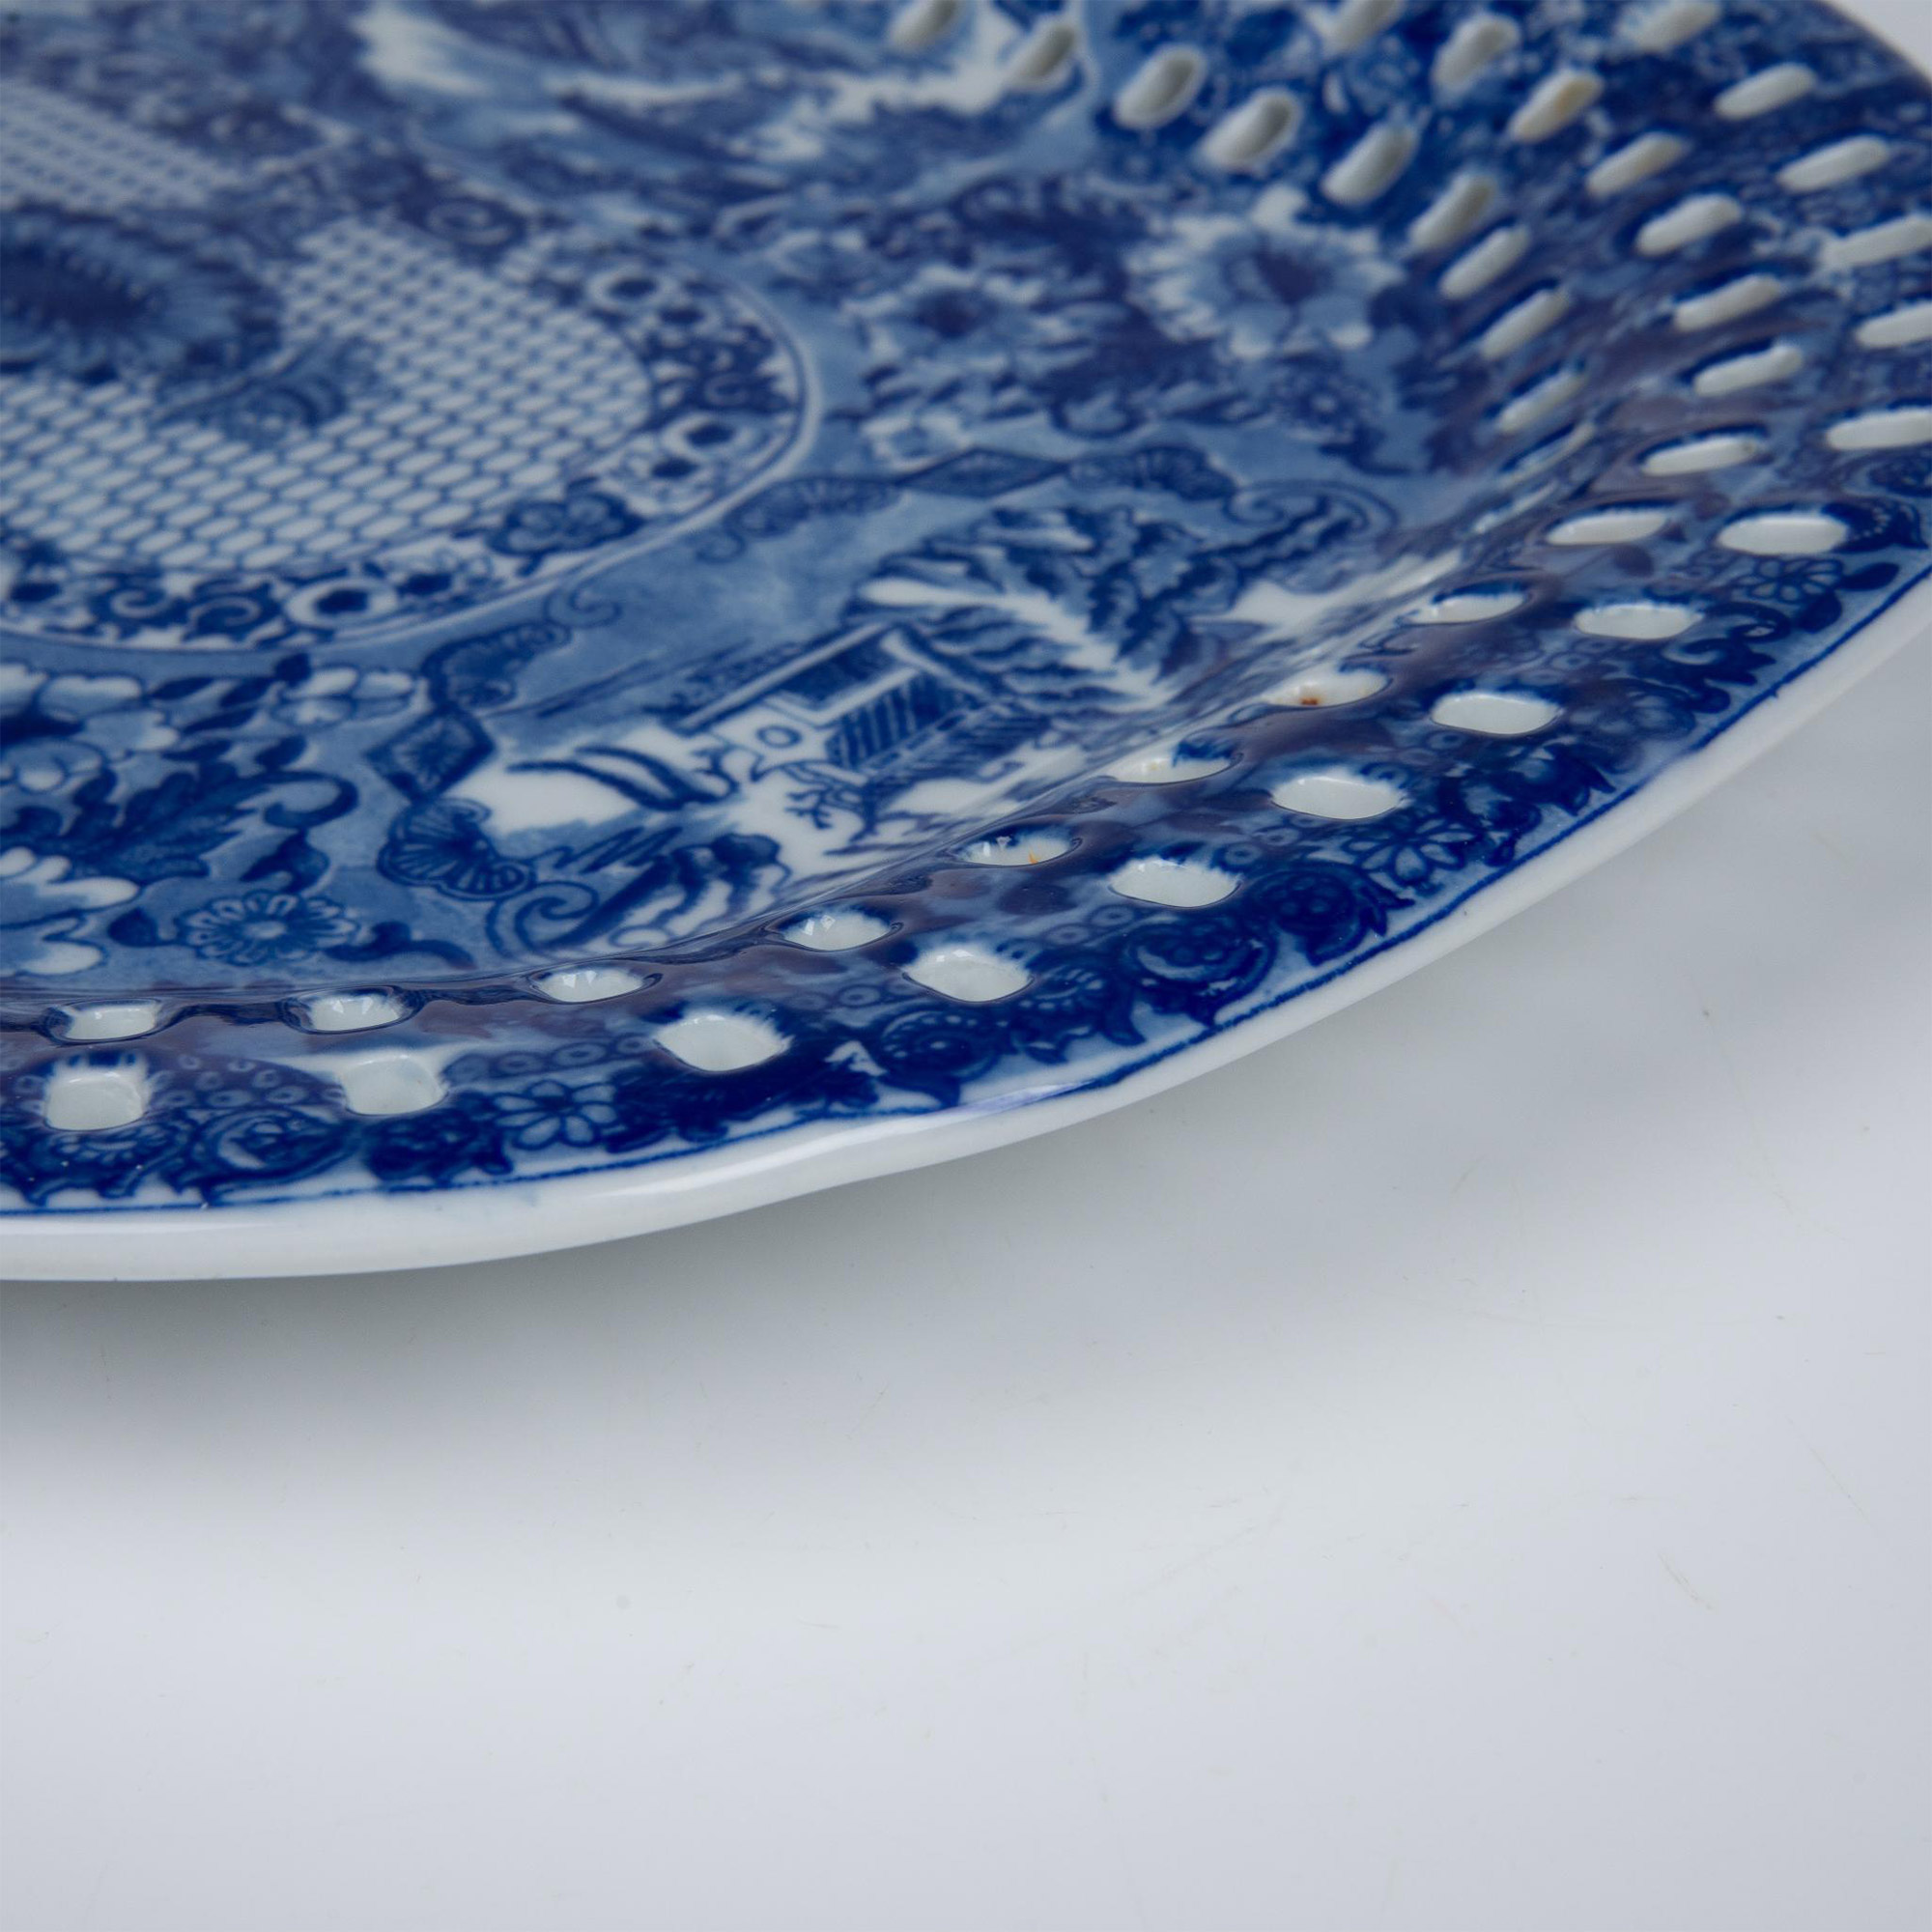 Victoria Ware Ironstone Blue and White Platter - Image 3 of 4